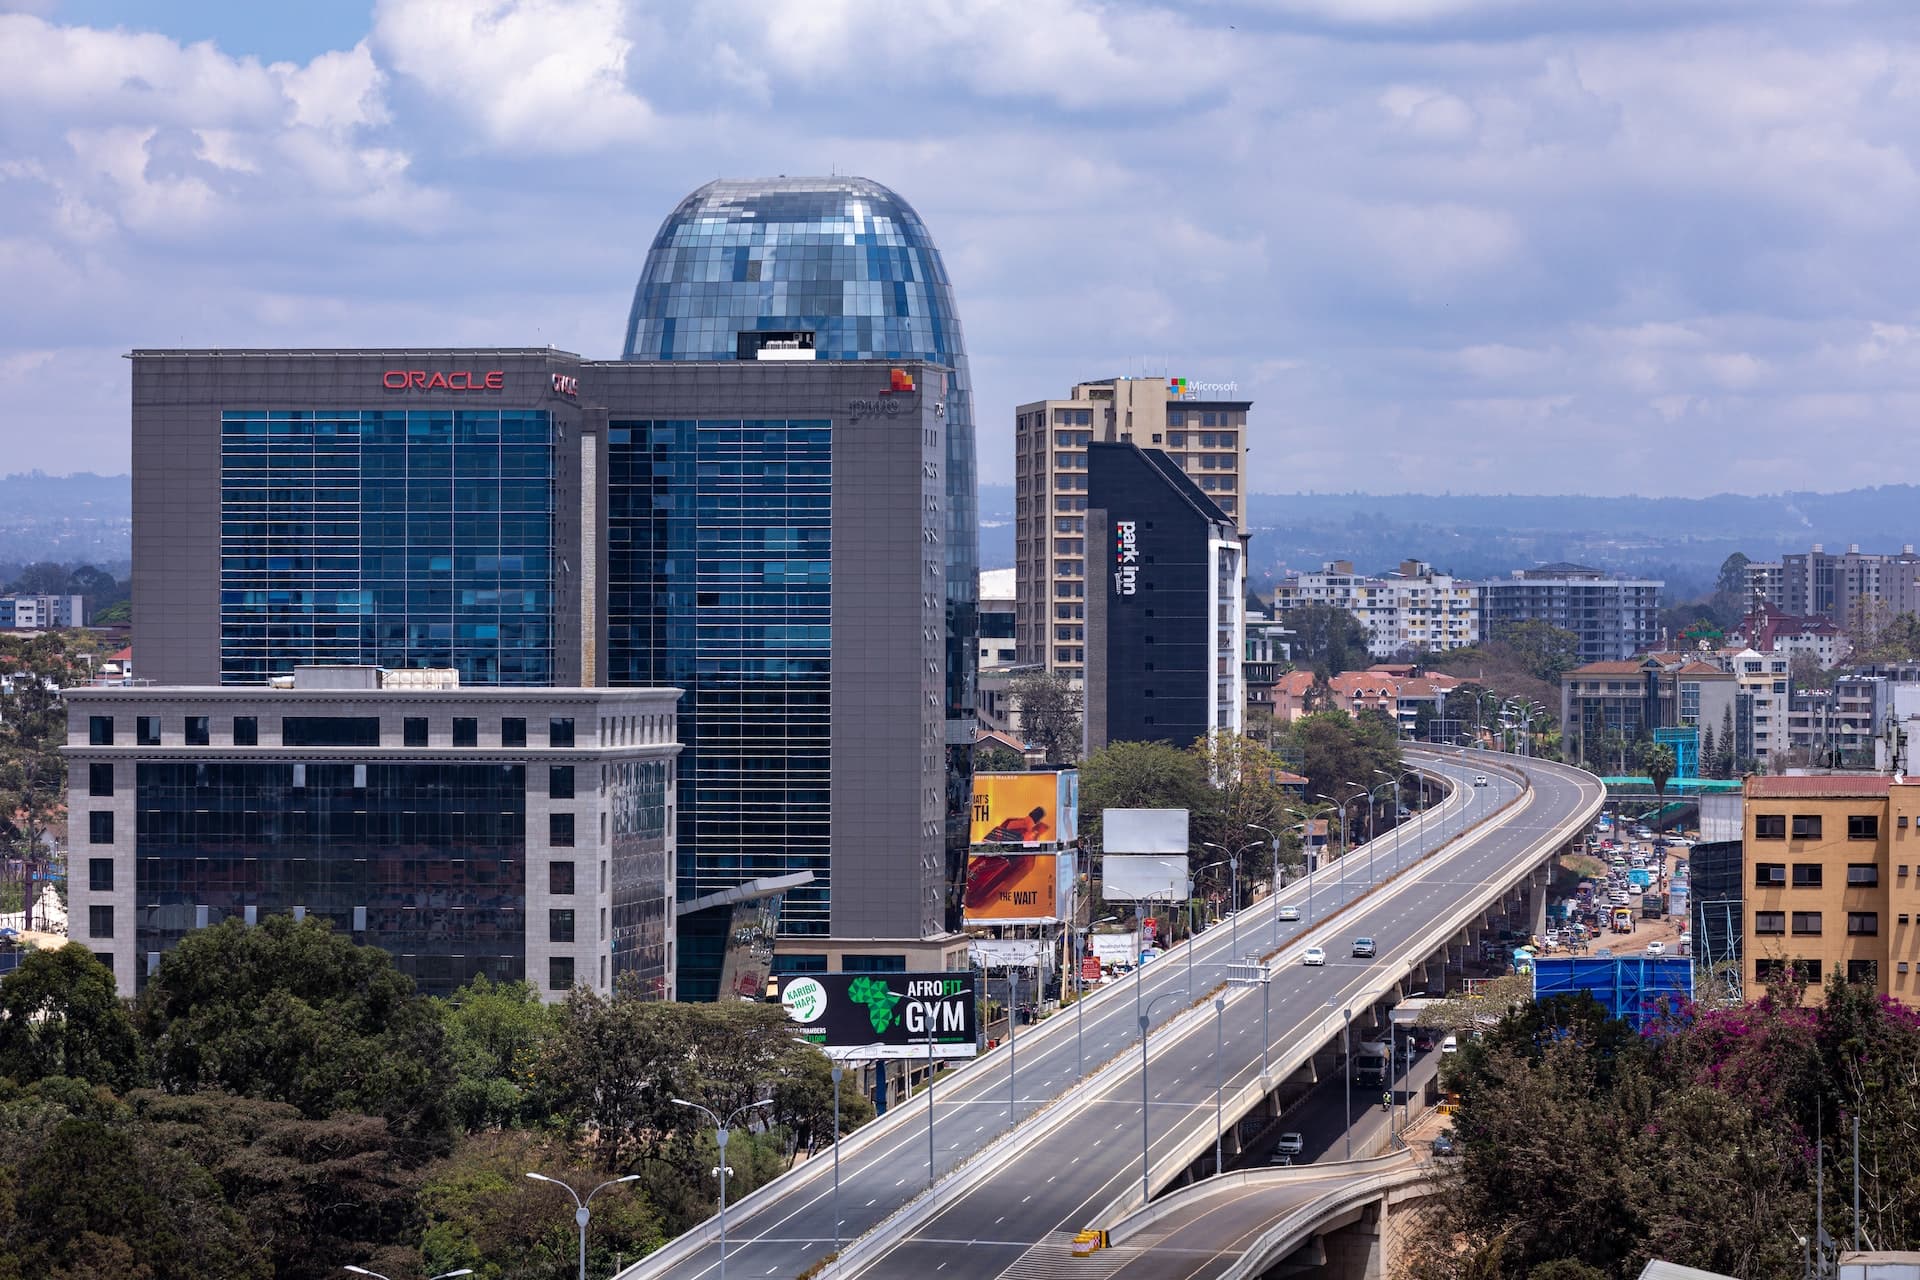 Westlands Property Location Guide; Nairobi's Vibrant Business and Lifestyle Hub